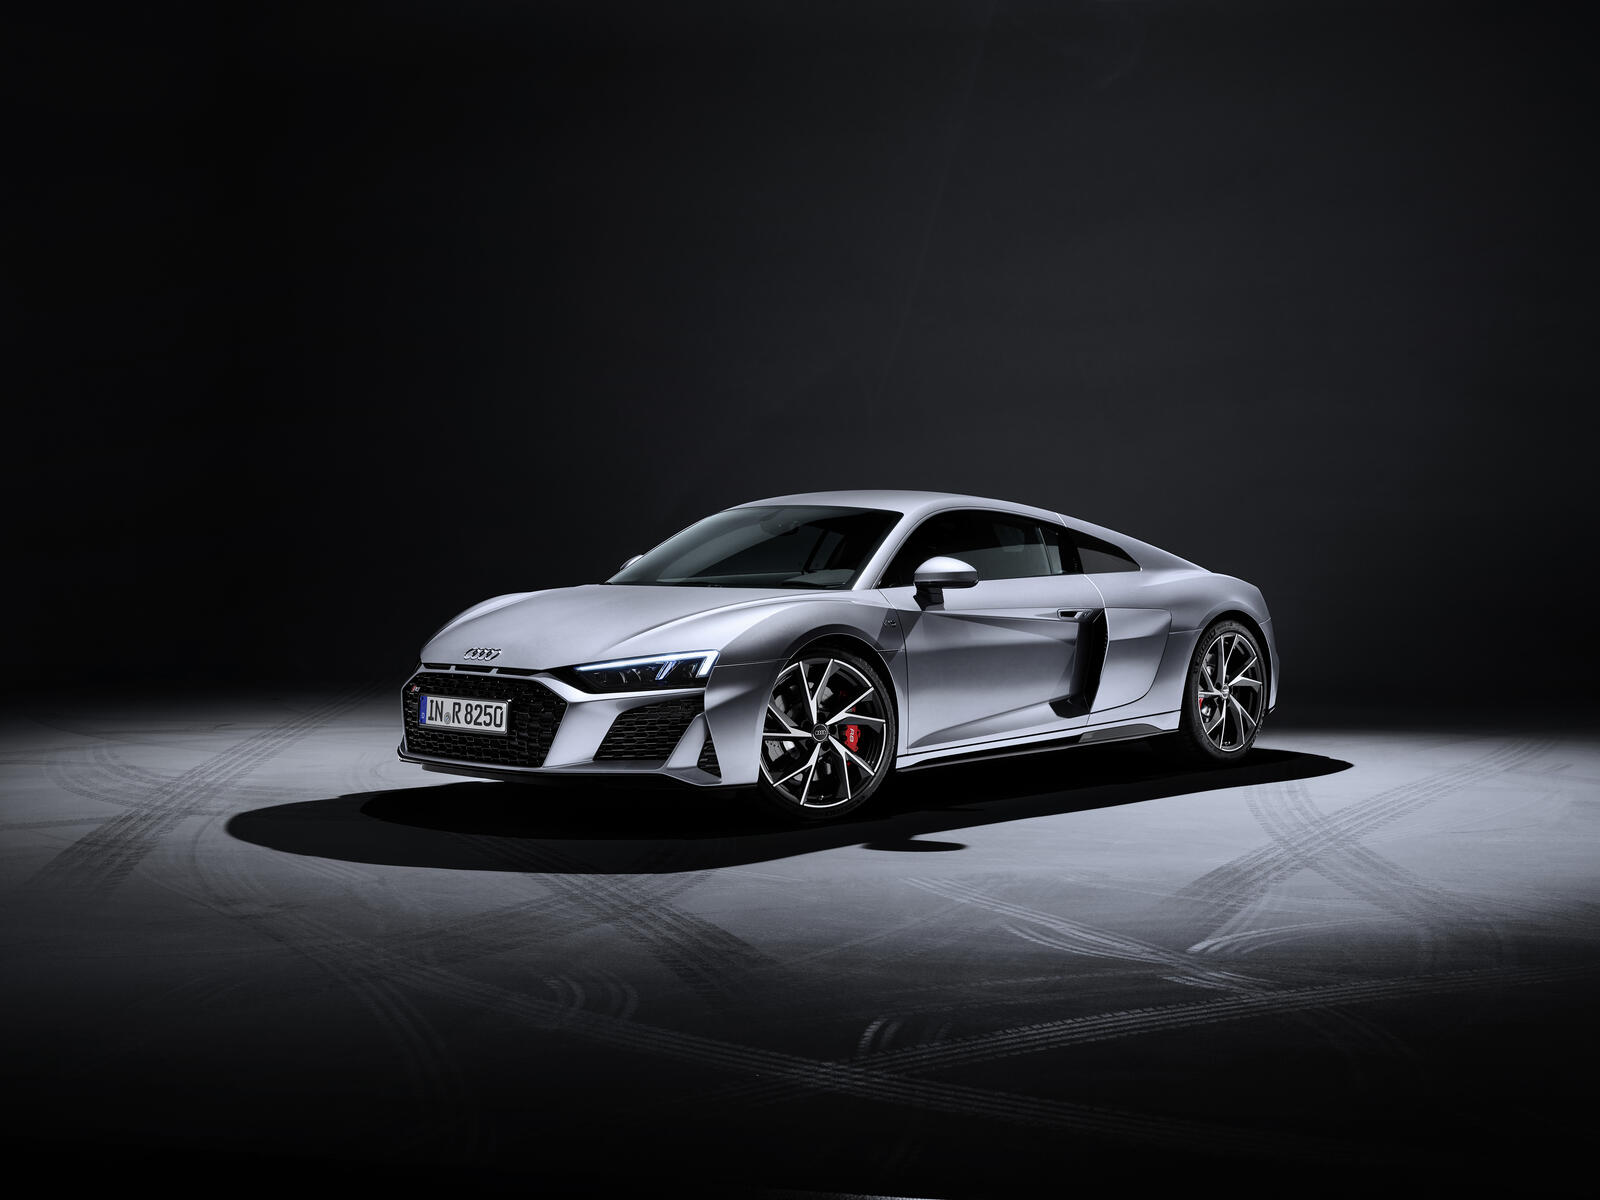 Wallpapers coupe Audi Audi R8 on the desktop